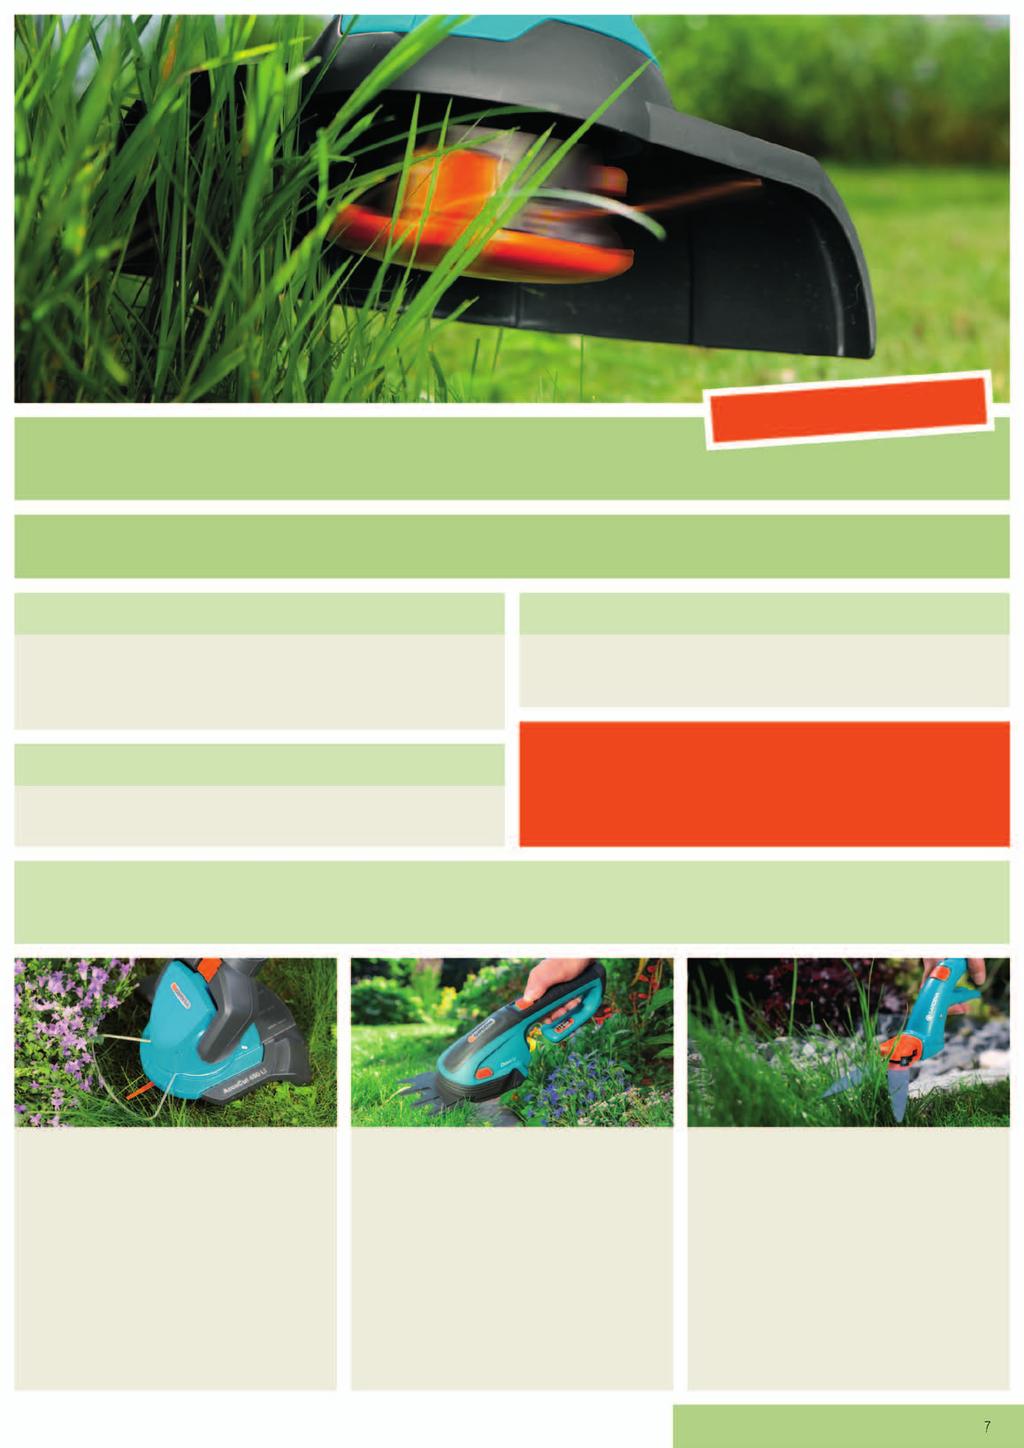 A perfect lawn contour is achieved with mechanical grass shears, battery grass shears, or a trimmer, depending on the demand and length of the lawn edge. Why? Where? Precision mowing as with shears.